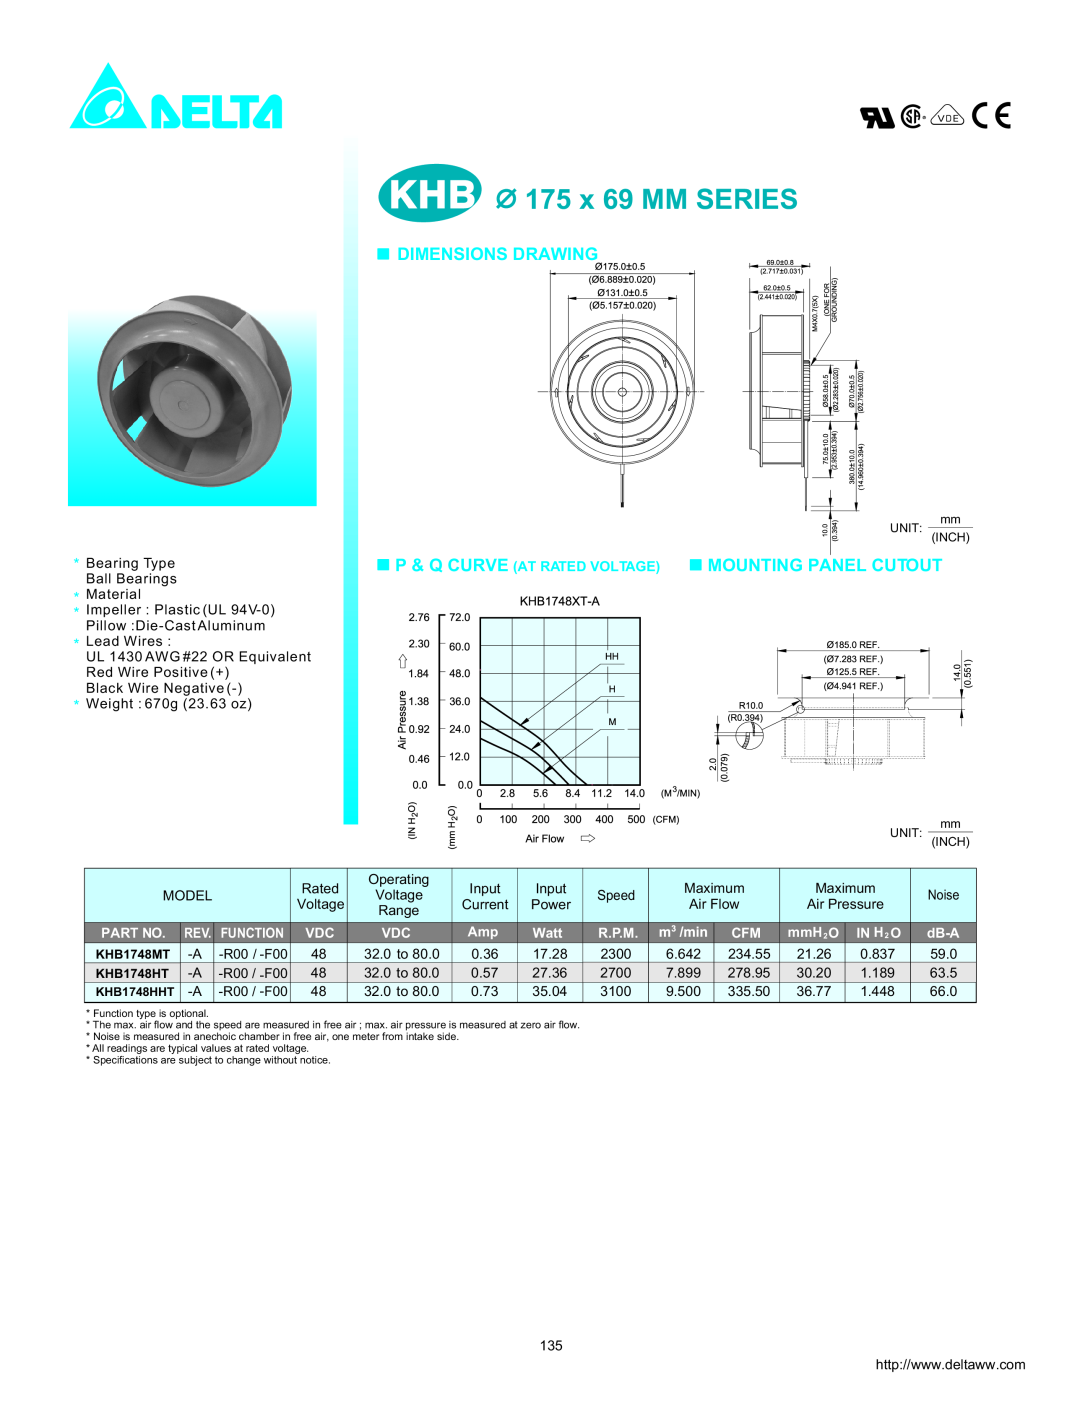 Delta Electronics KHB1748MT Rev. Function, IN H 2 O, KHB 175 x 69 MM SERIES, Dimensions Drawing, Mounting Panel Cutout 